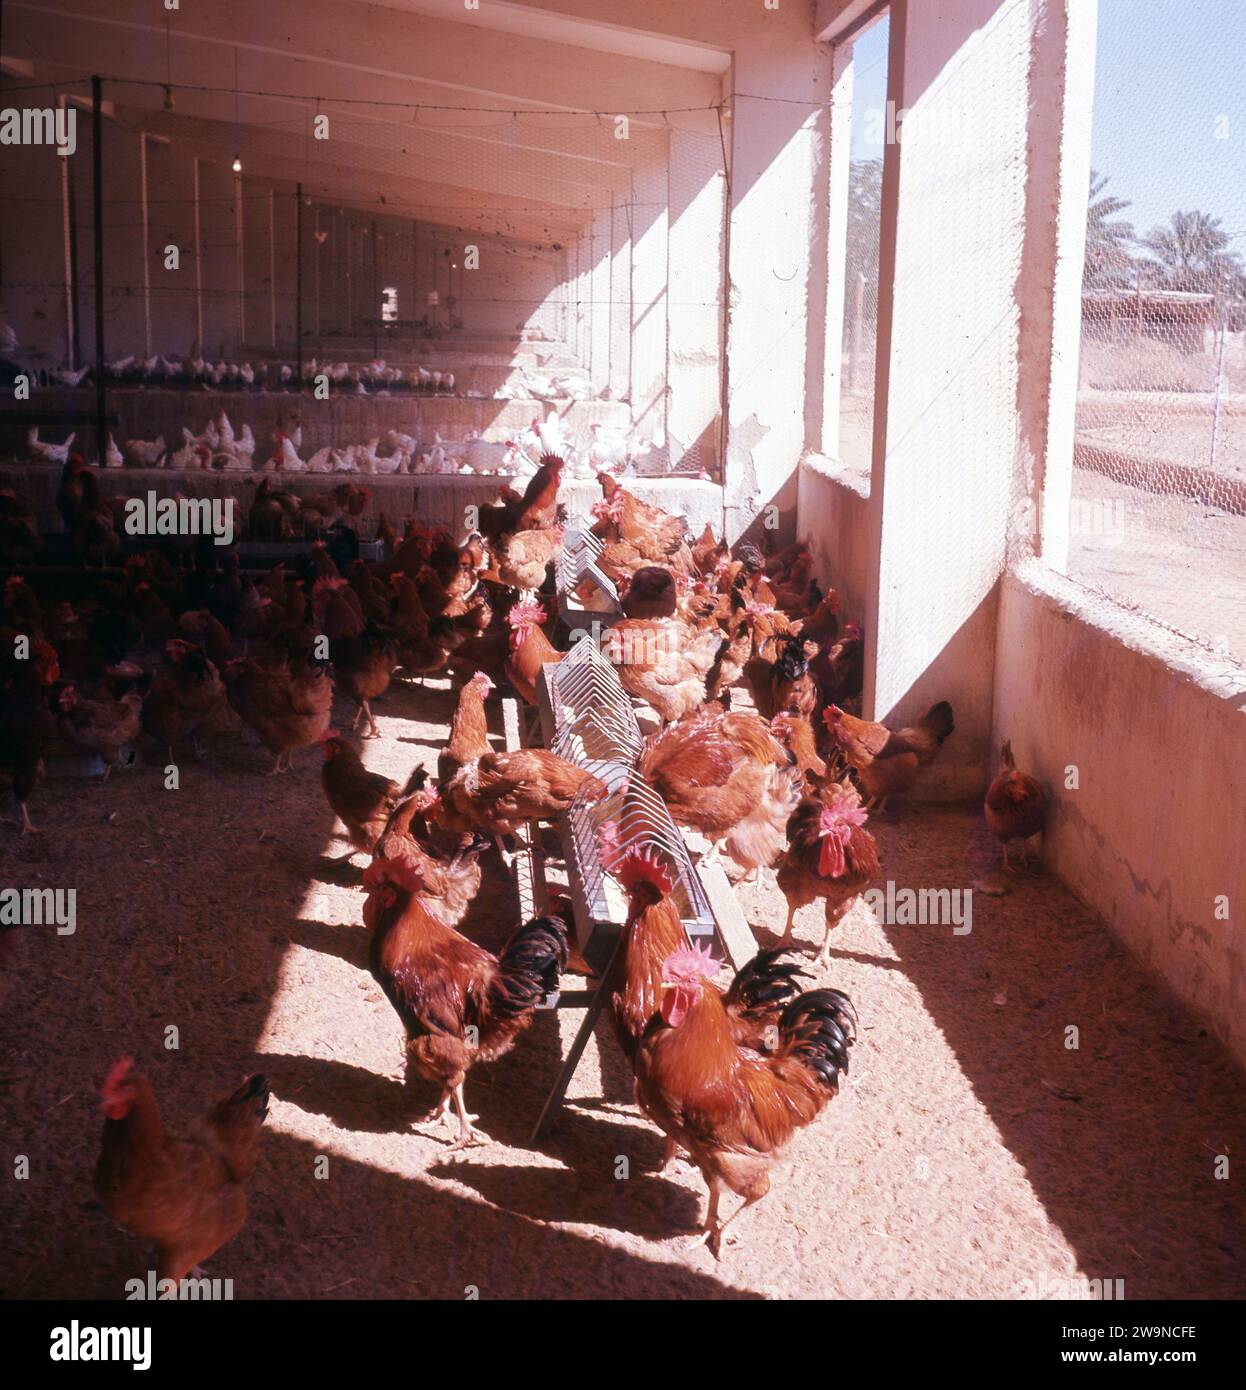 1964, historical, Al-Kharj Oasis, poultry farm, Saudi Arabia. The area of Al-Kharj is known as a 'water land' due to its many natural springs and deep water pools. As the land was fertile and could support agricutural production, Al-Kharj was selected in 1938 as the site to establish a government experimental farm, which subsequently developed into a major food producing region for cerals, dates, fruits and vegetables and later livestock and poultry. Stock Photo